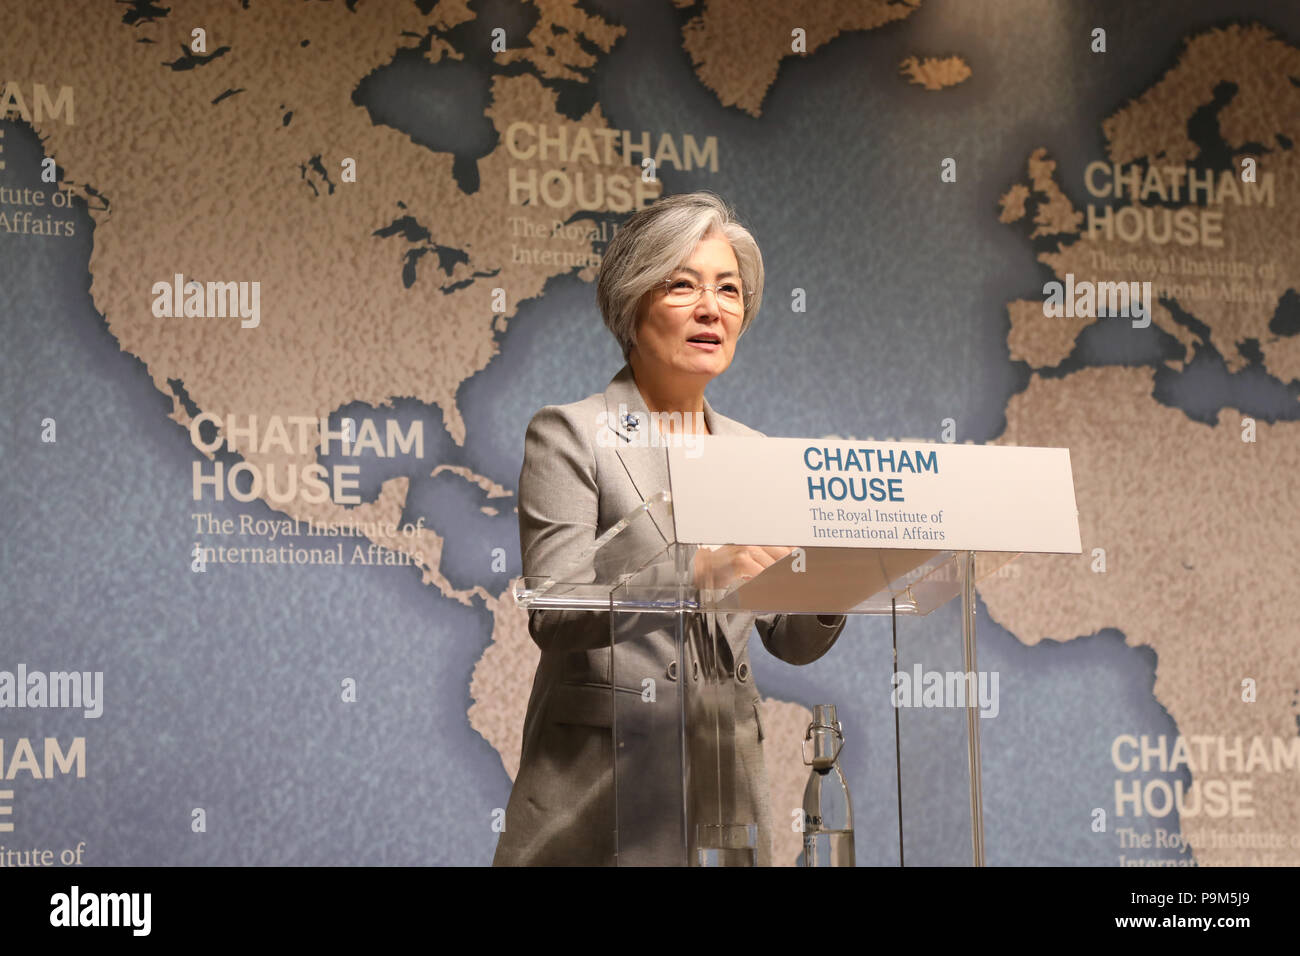 London / UK - July 19 2018: Kang Kyung-wha, Minister of Foreign Affairs of the Republic of Korea (South Korea), at the Chatham House think-tank in central London where she gave a speech on the future for the Korean peninsula Credit: Dominic Dudley/Alamy Live News Stock Photo